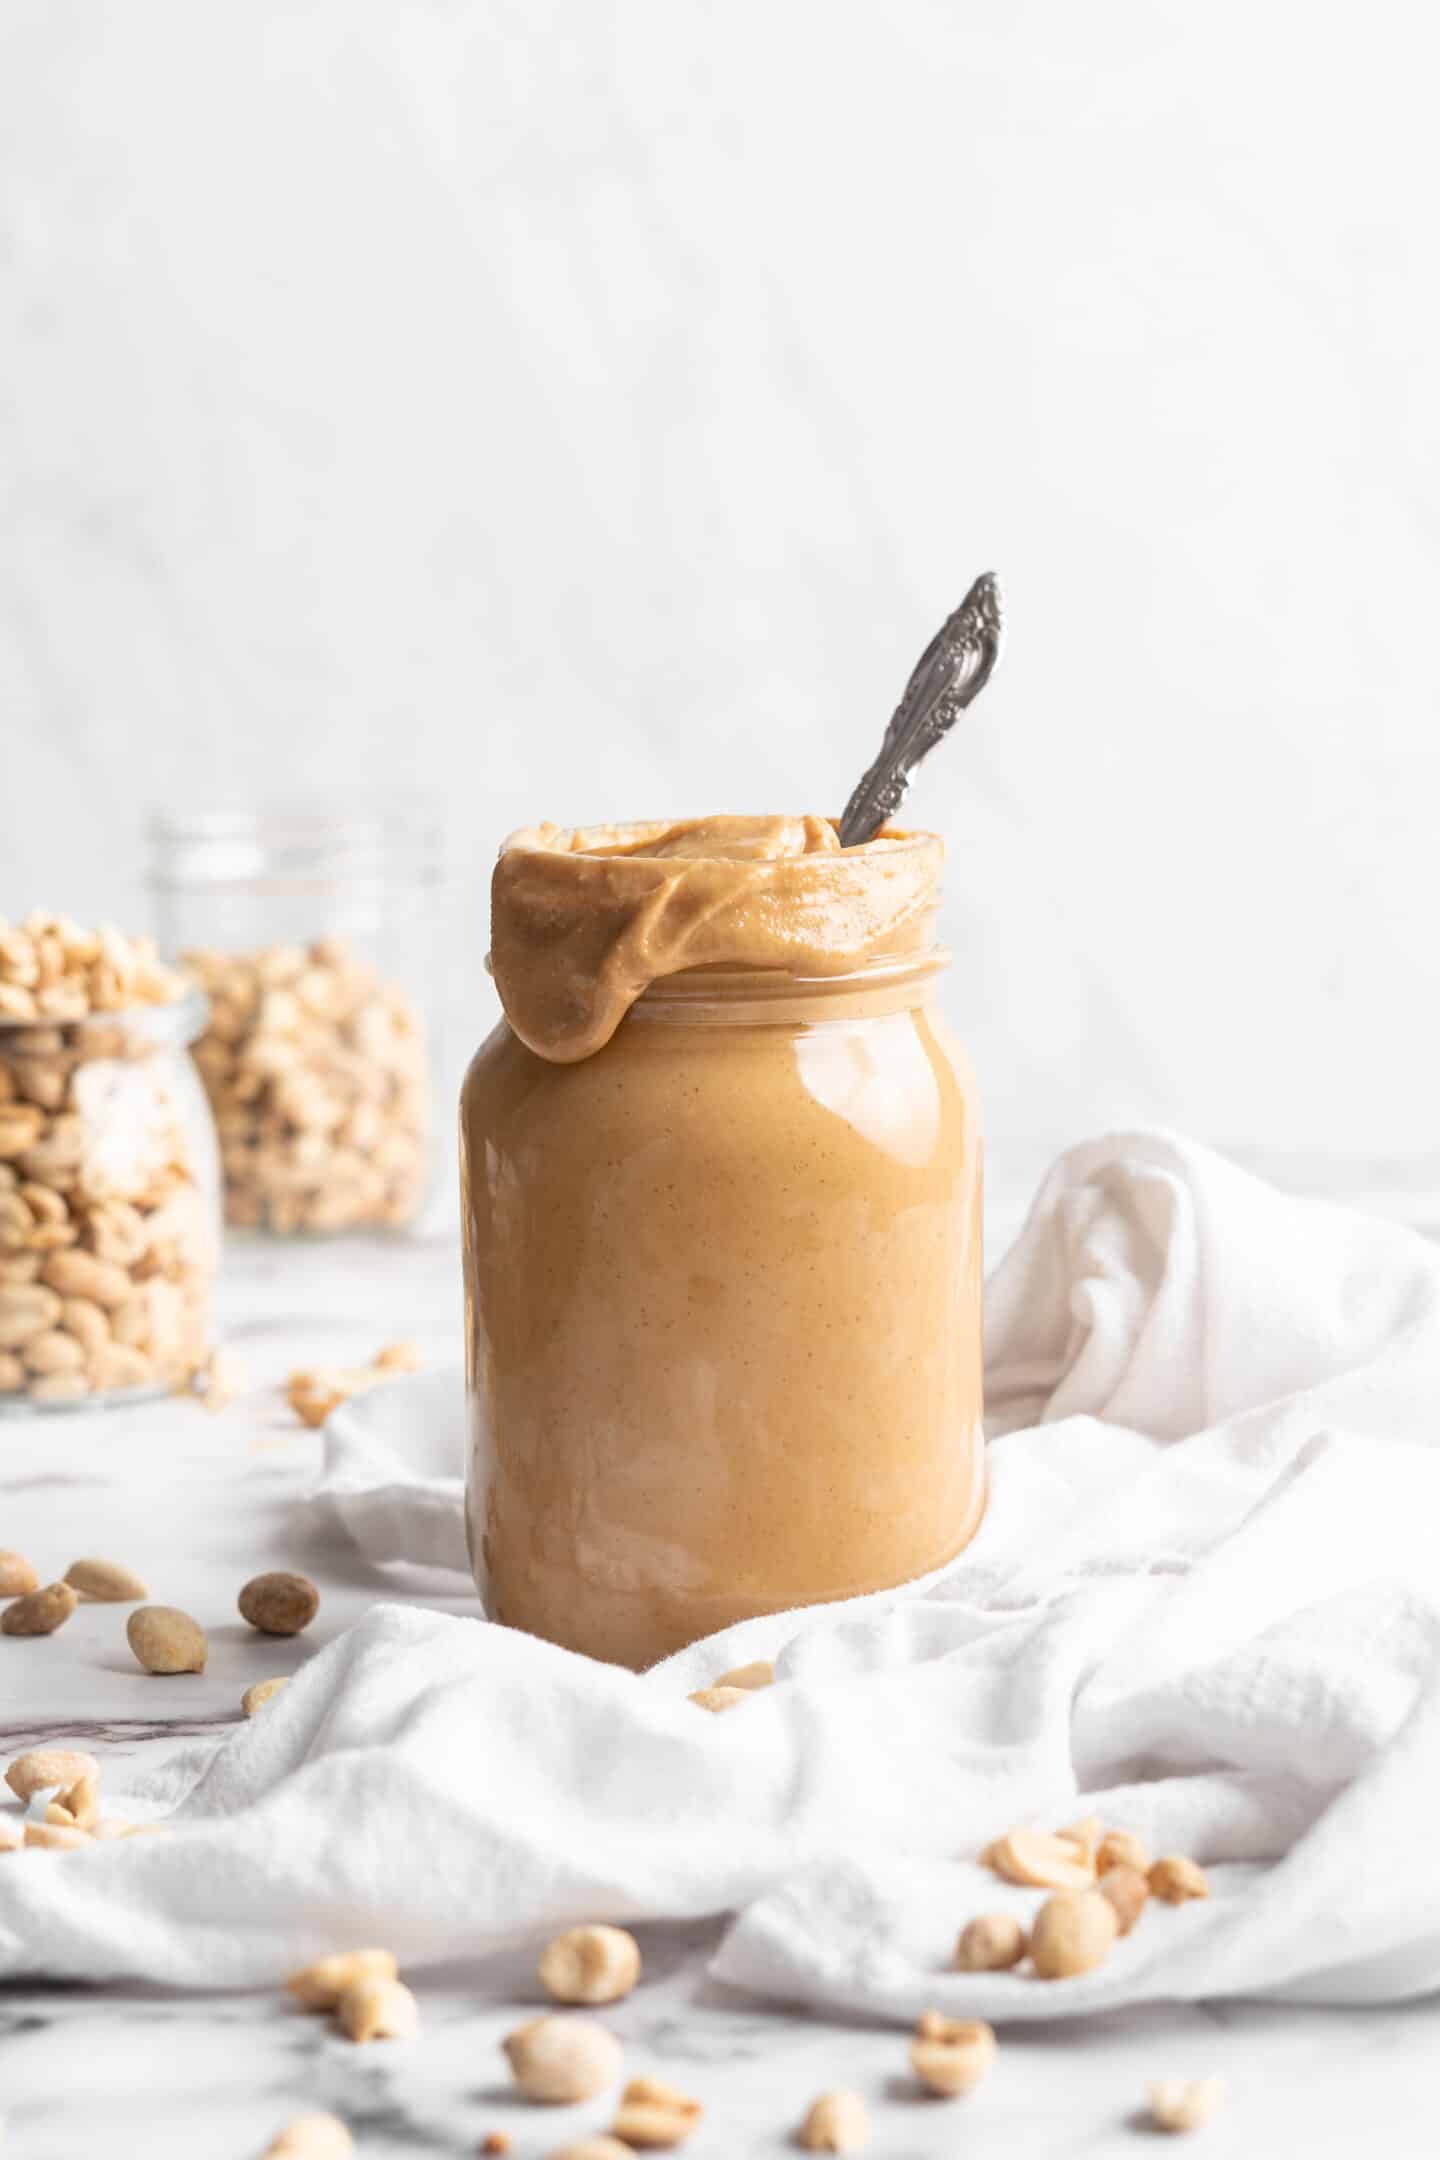 Jar of homemade peanut butter with spoon inside